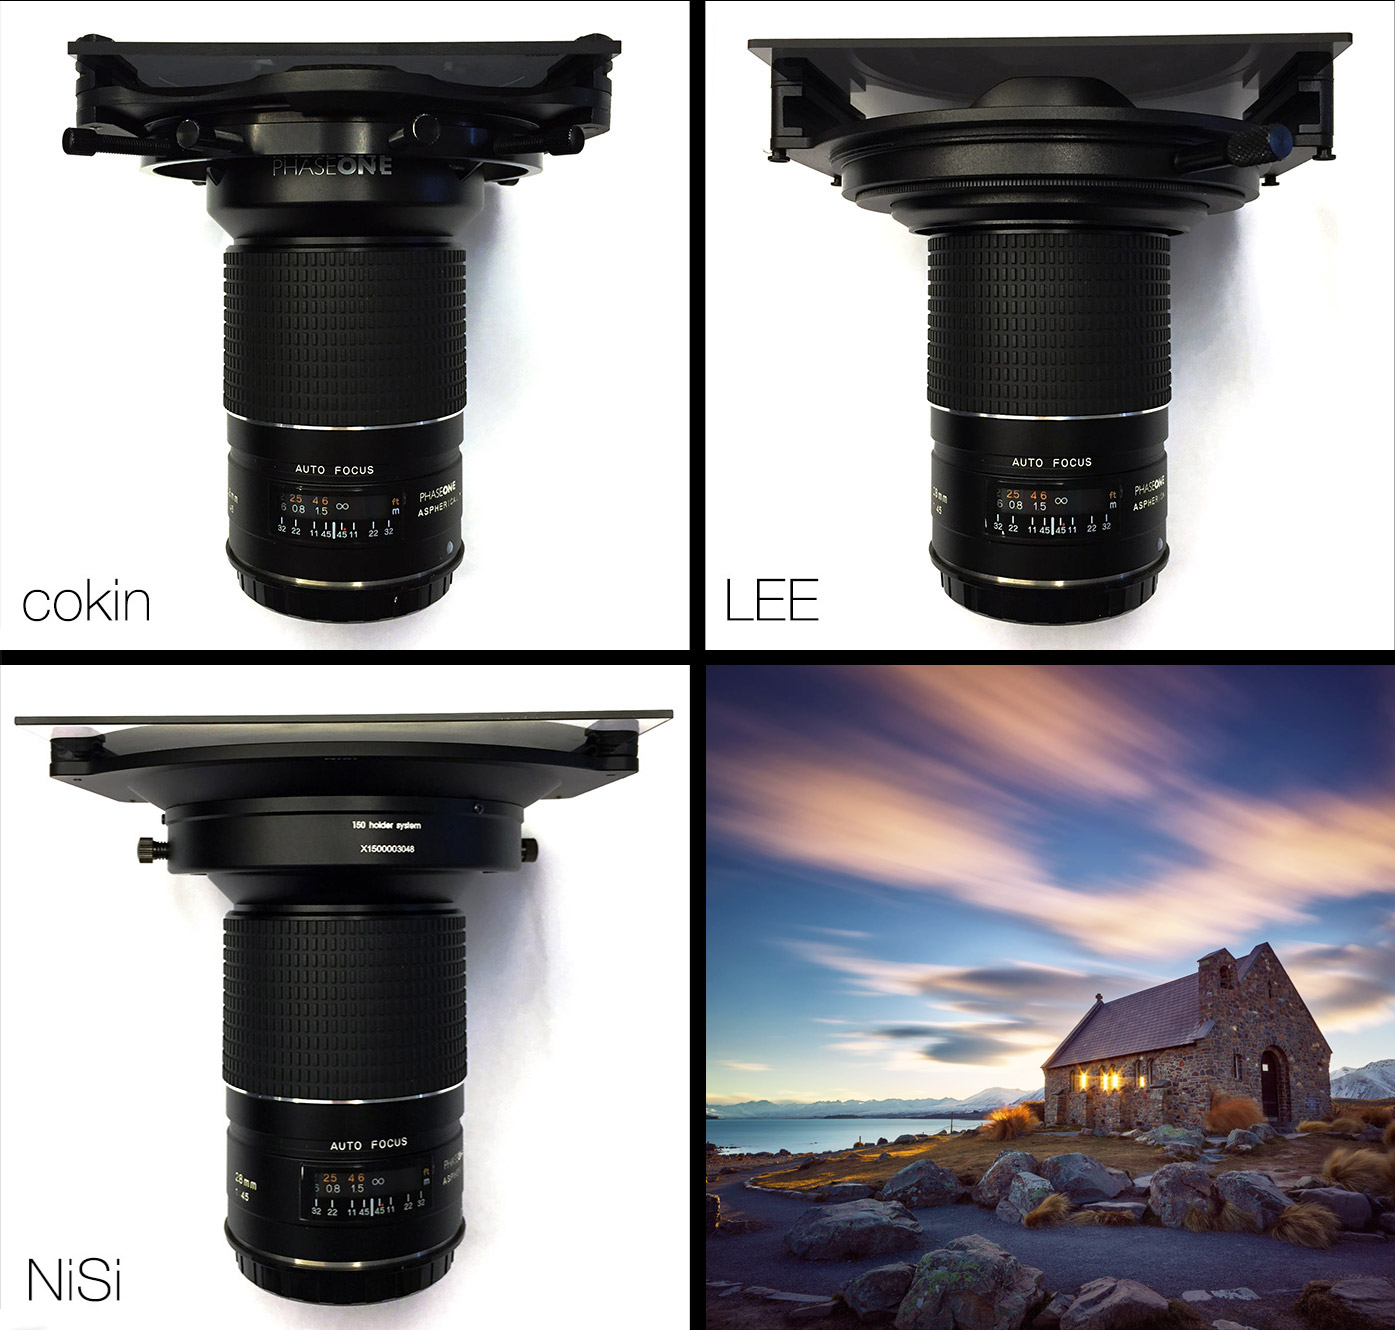 filter comparison lee nisi cokin phase one 28mm lens paul reiffer photographer review filters